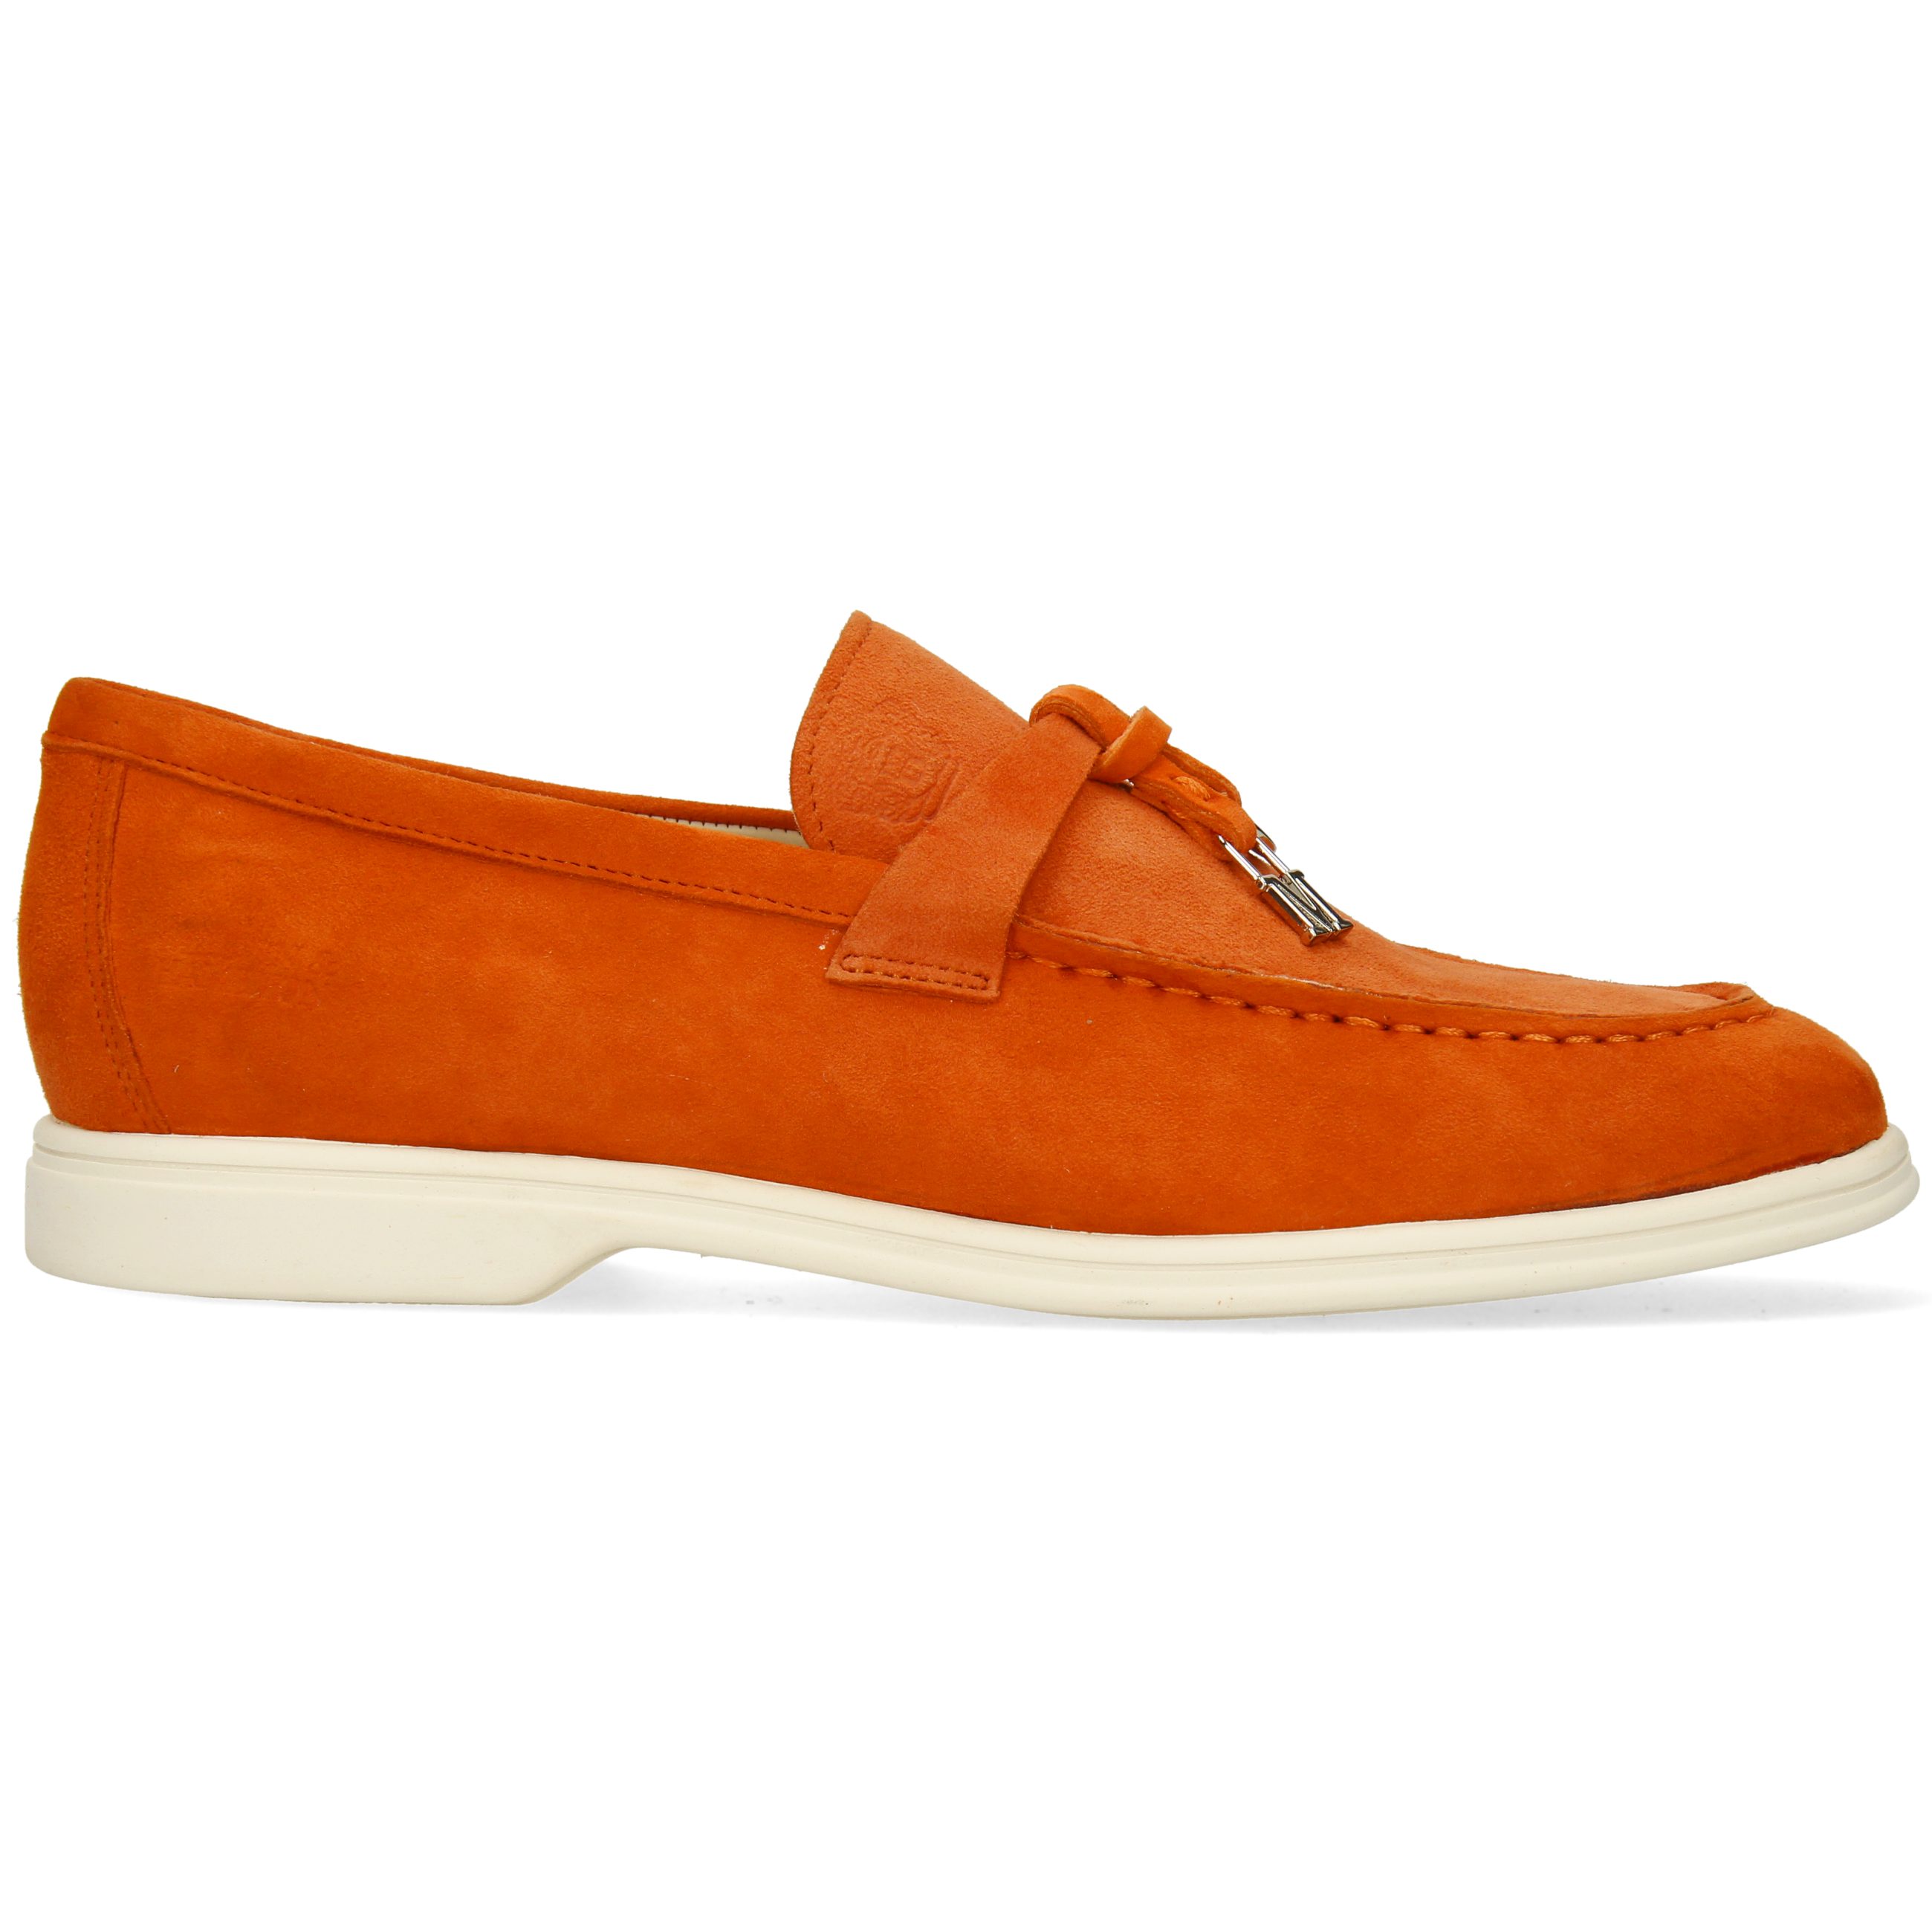 3 Loafer Adley Melvin & Hamilton Coral Eco Suede Ring